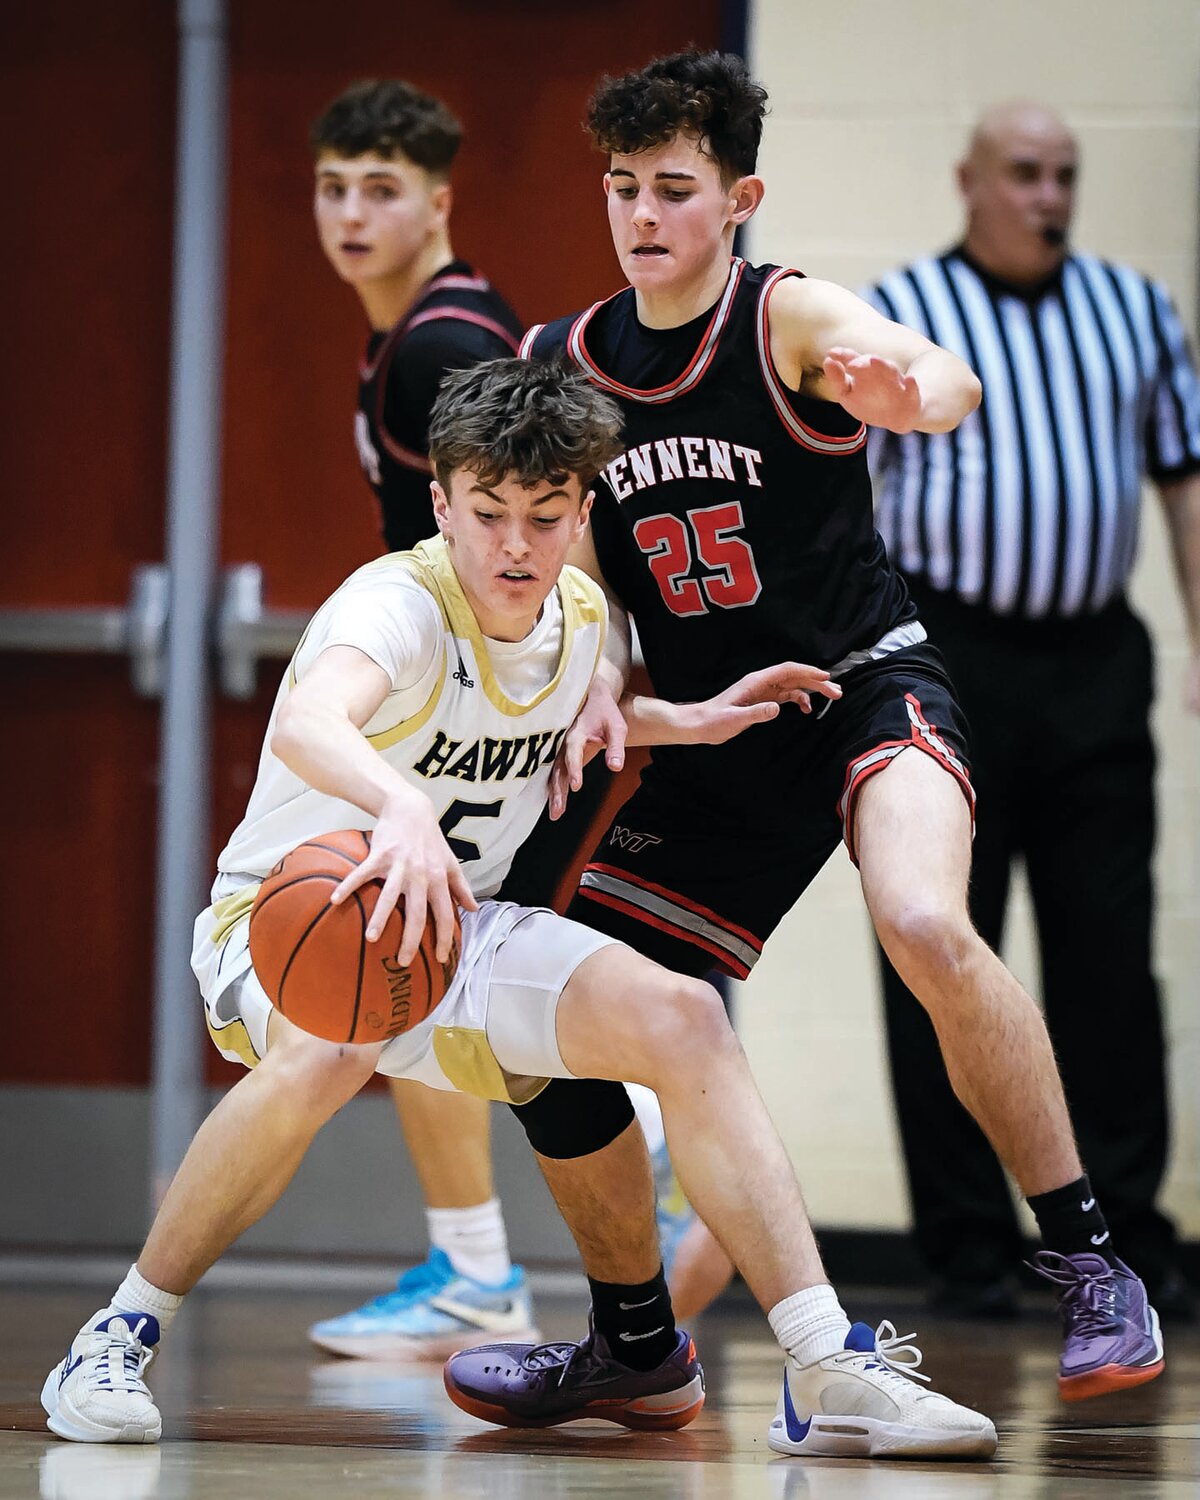 Council Rock South’s Ryan Delp tries to get around the defense of William Tennent’s Tre Stracuzzi in the first quarter.